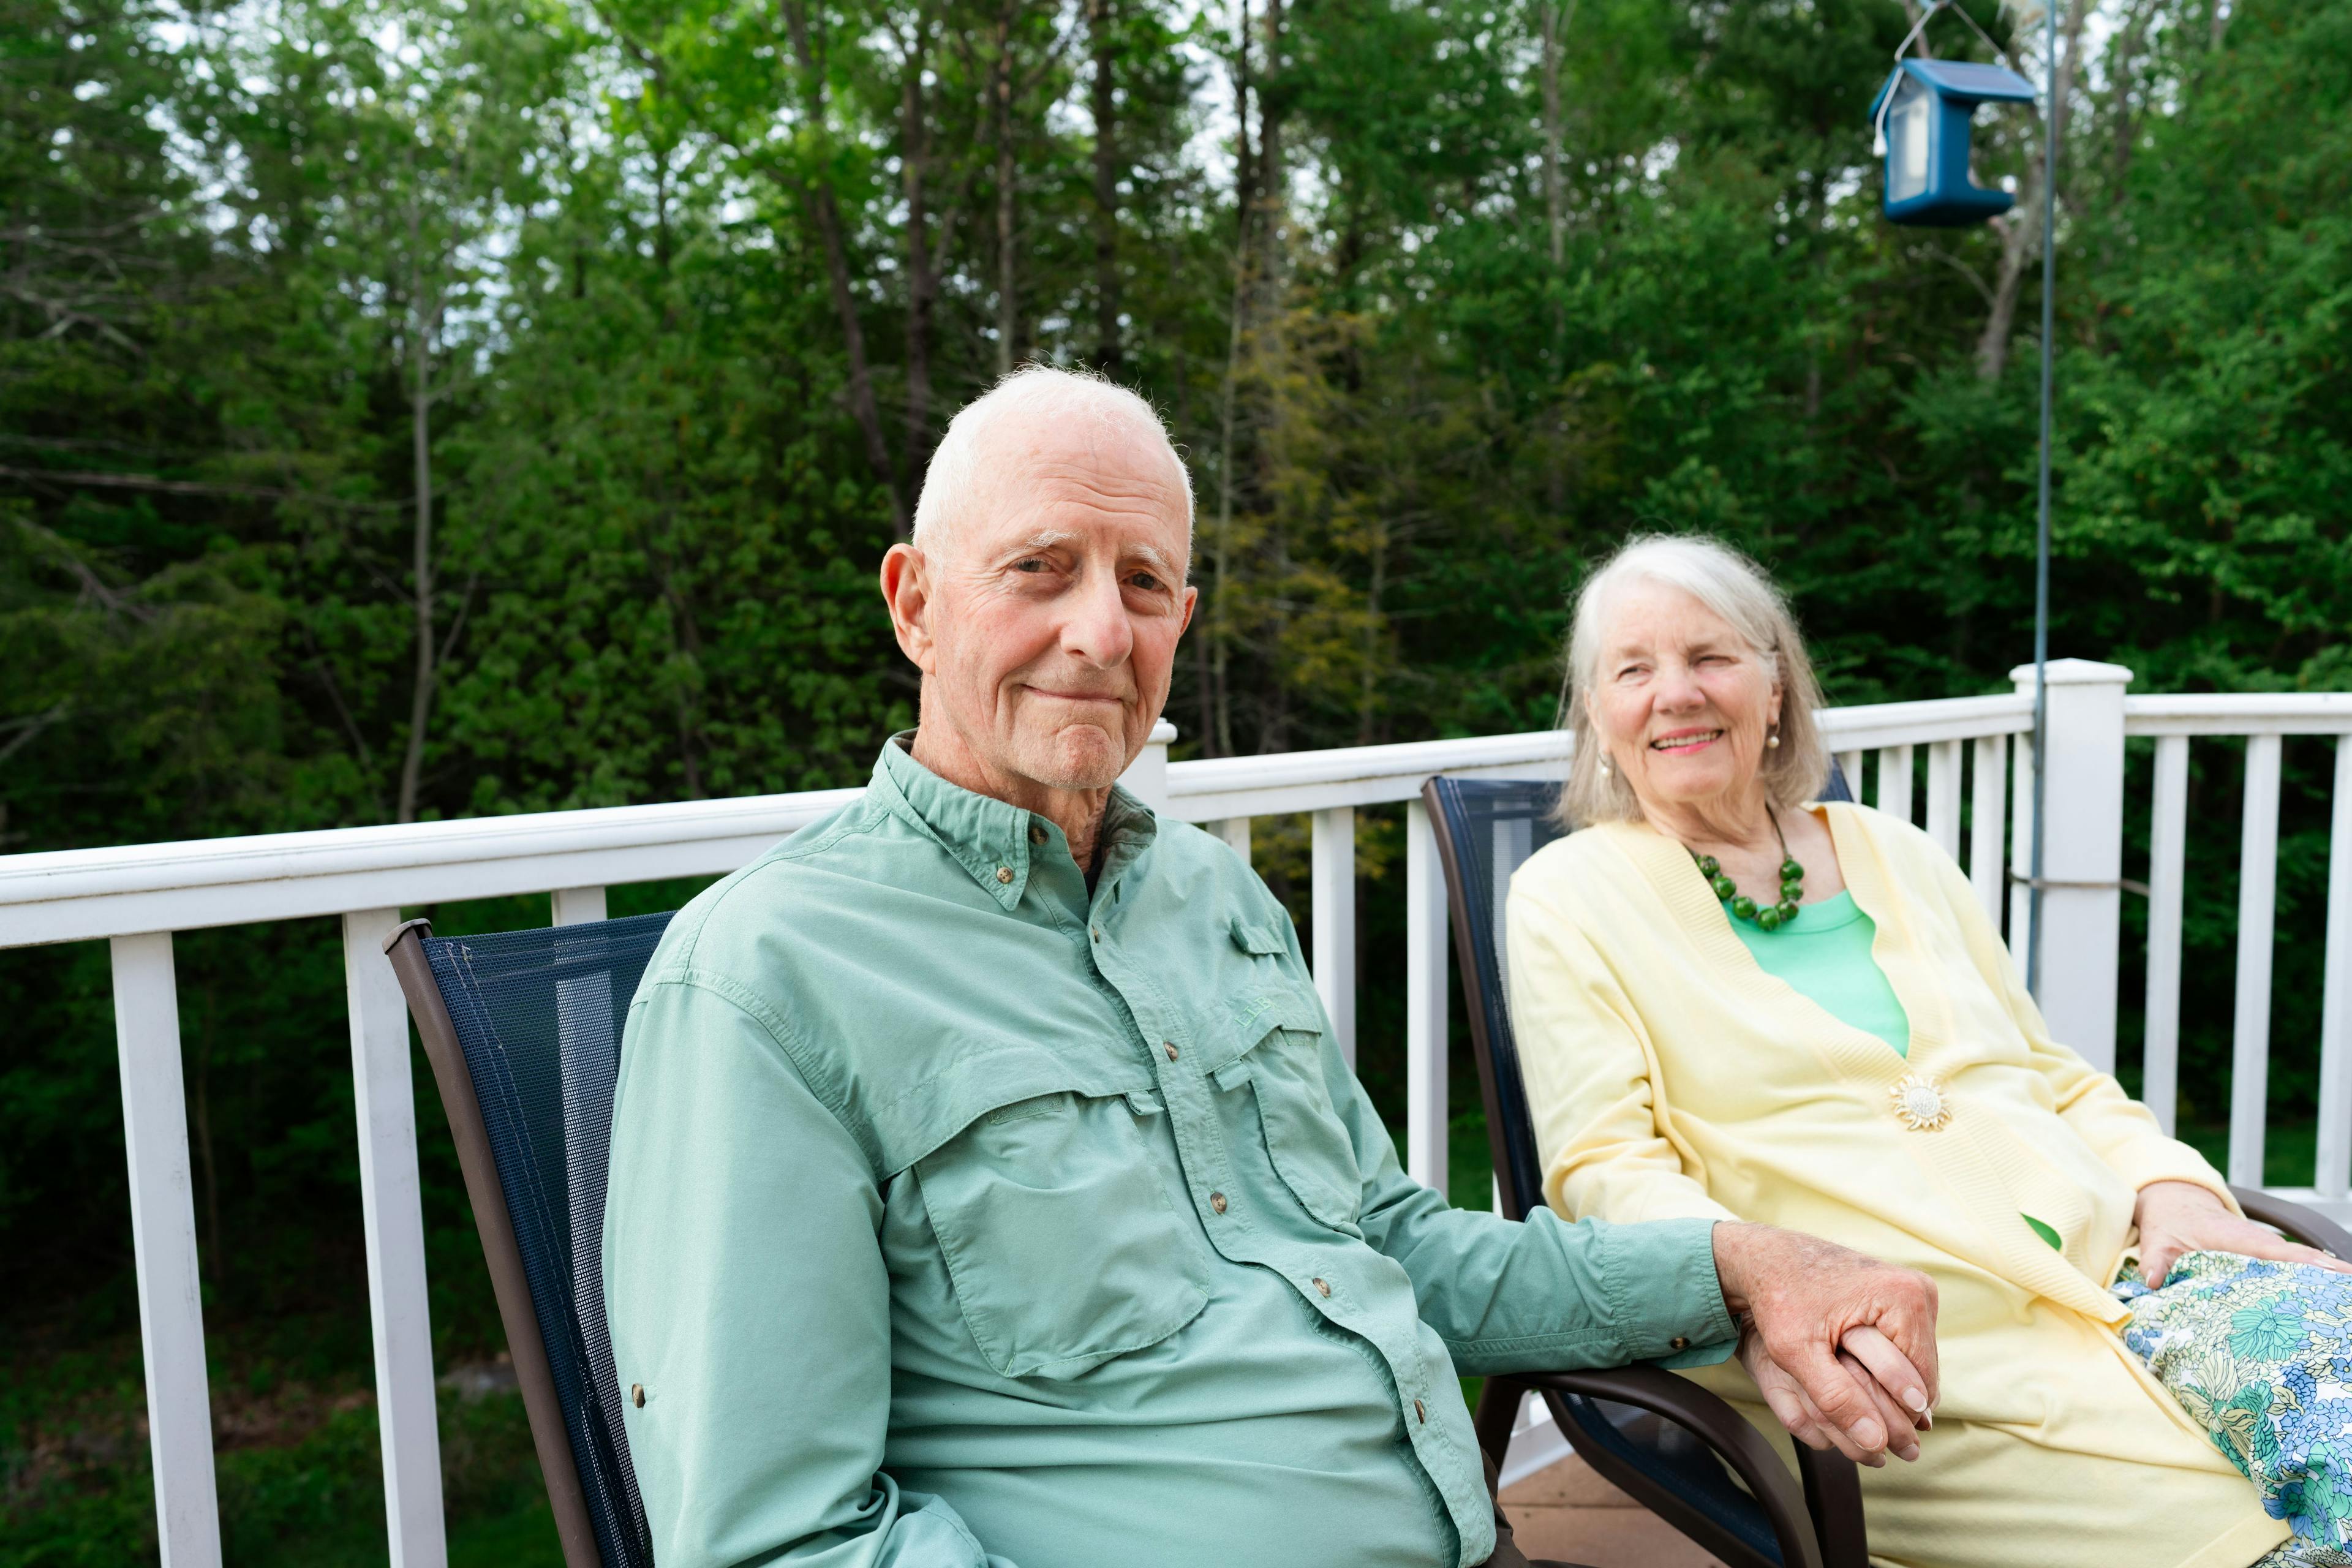 Image of a man and woman sitting together on the porch. Photo credit: Dani Cournoyer